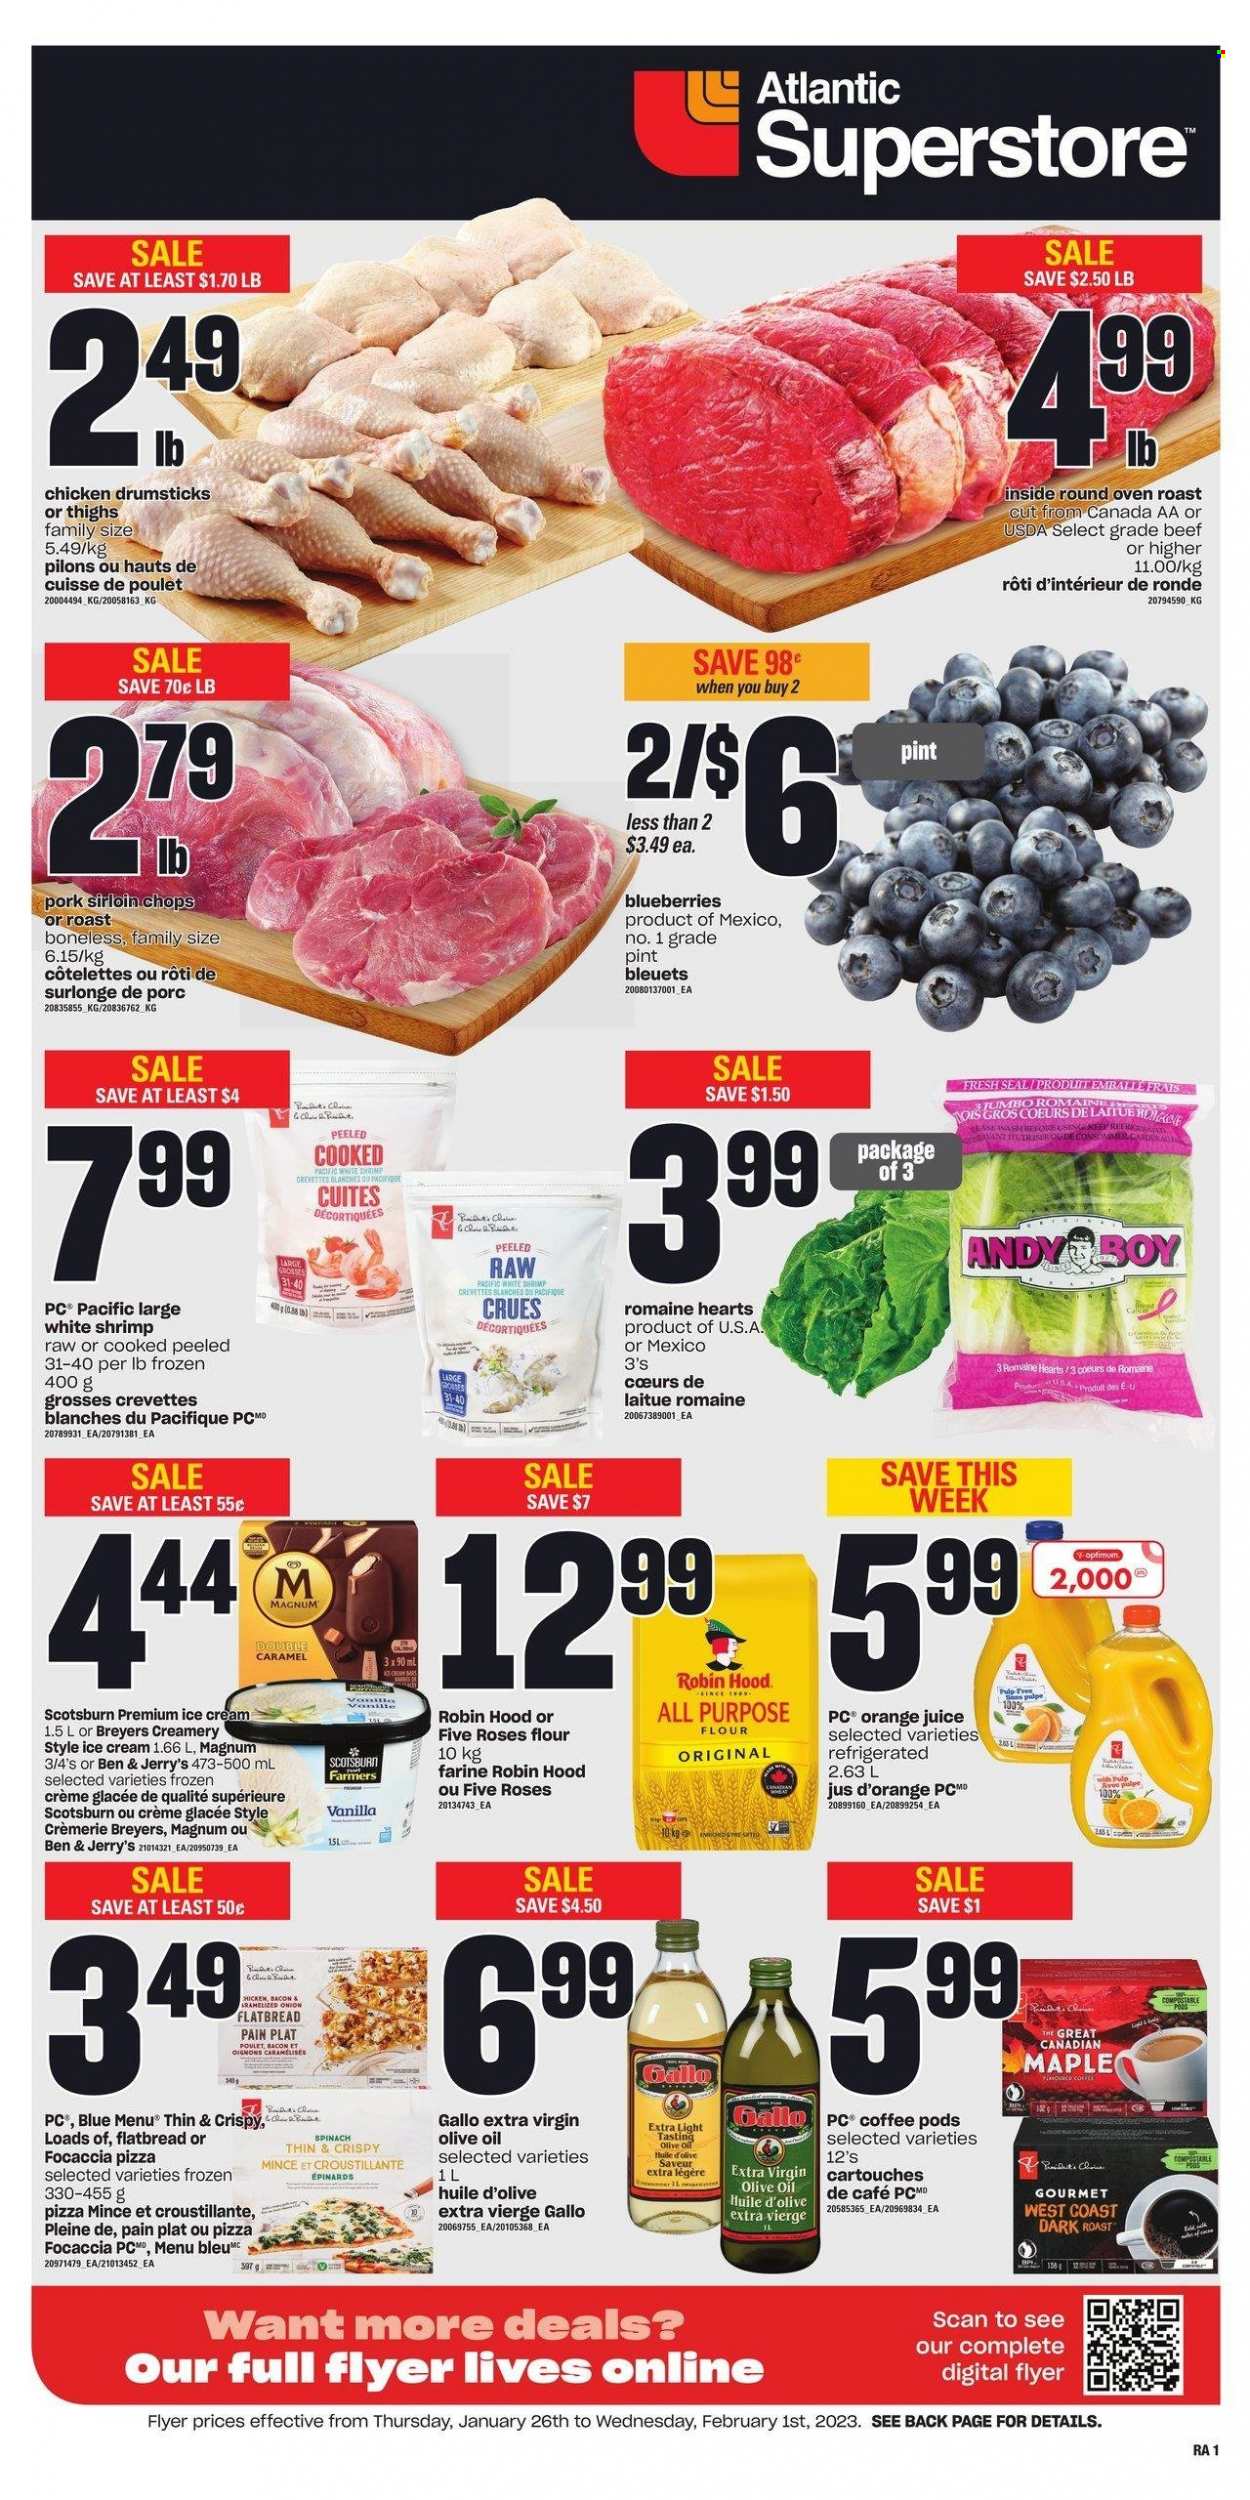 thumbnail - Atlantic Superstore Flyer - January 26, 2023 - February 01, 2023 - Sales products - focaccia, flatbread, onion, blueberries, shrimps, pizza, bacon, Magnum, ice cream, Ben & Jerry's, all purpose flour, flour, extra virgin olive oil, olive oil, oil, orange juice, juice, coffee, coffee pods, chicken drumsticks, chicken, pork loin. Page 1.